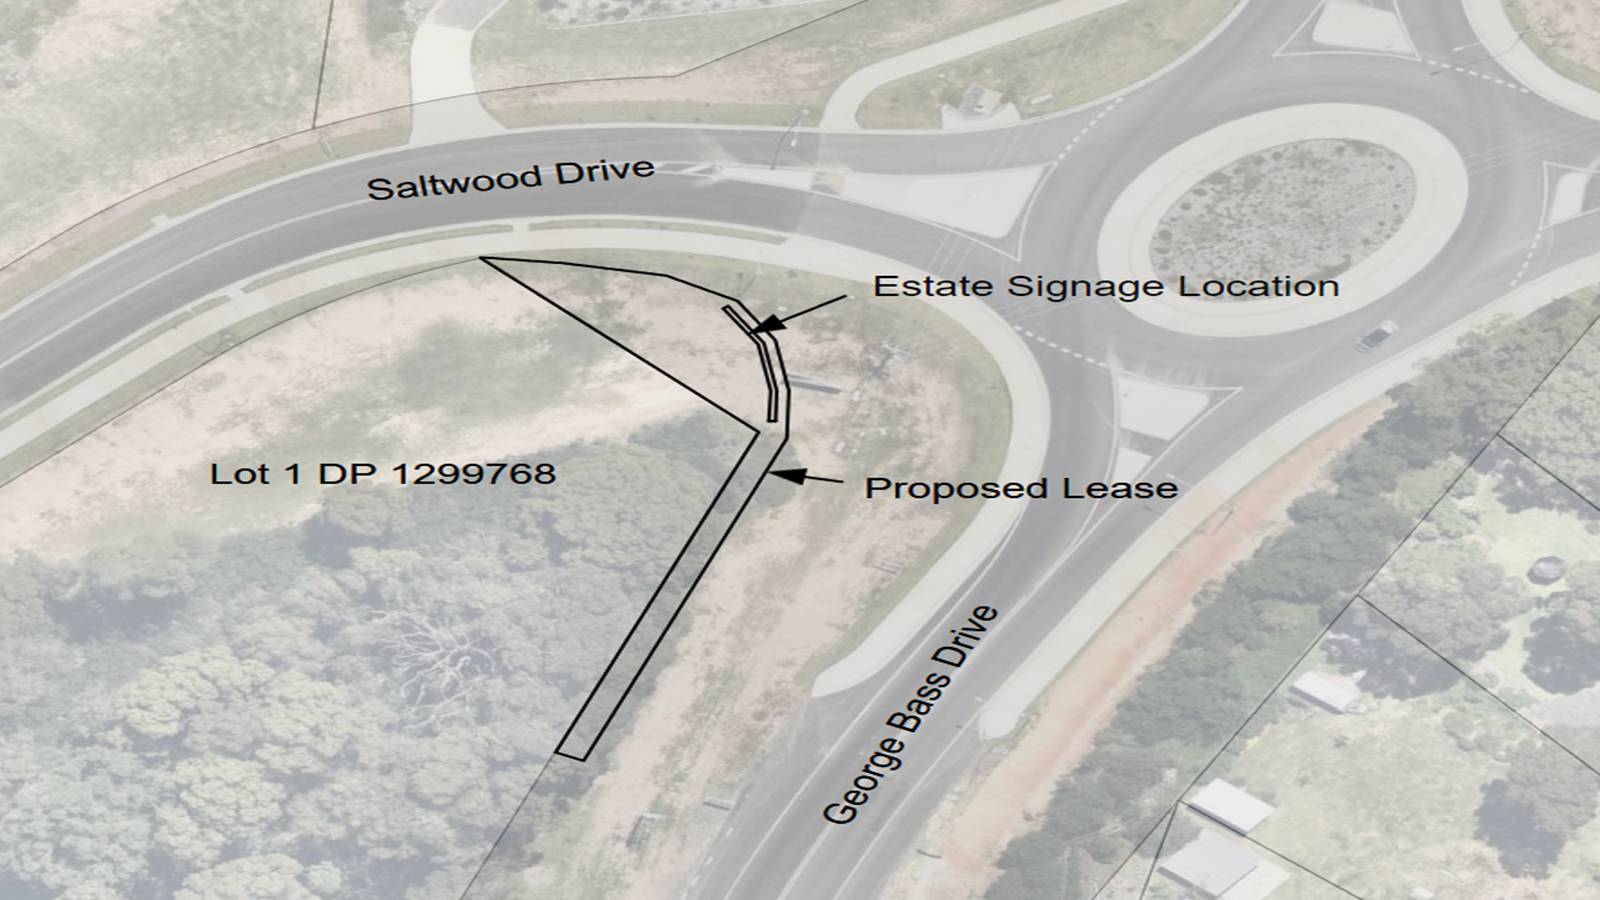 The aerial map shows the site of the proposed lease for estate signage and landscaping, which is adjacent to Saltwood Drive, and George Bass Drive, Rosedale